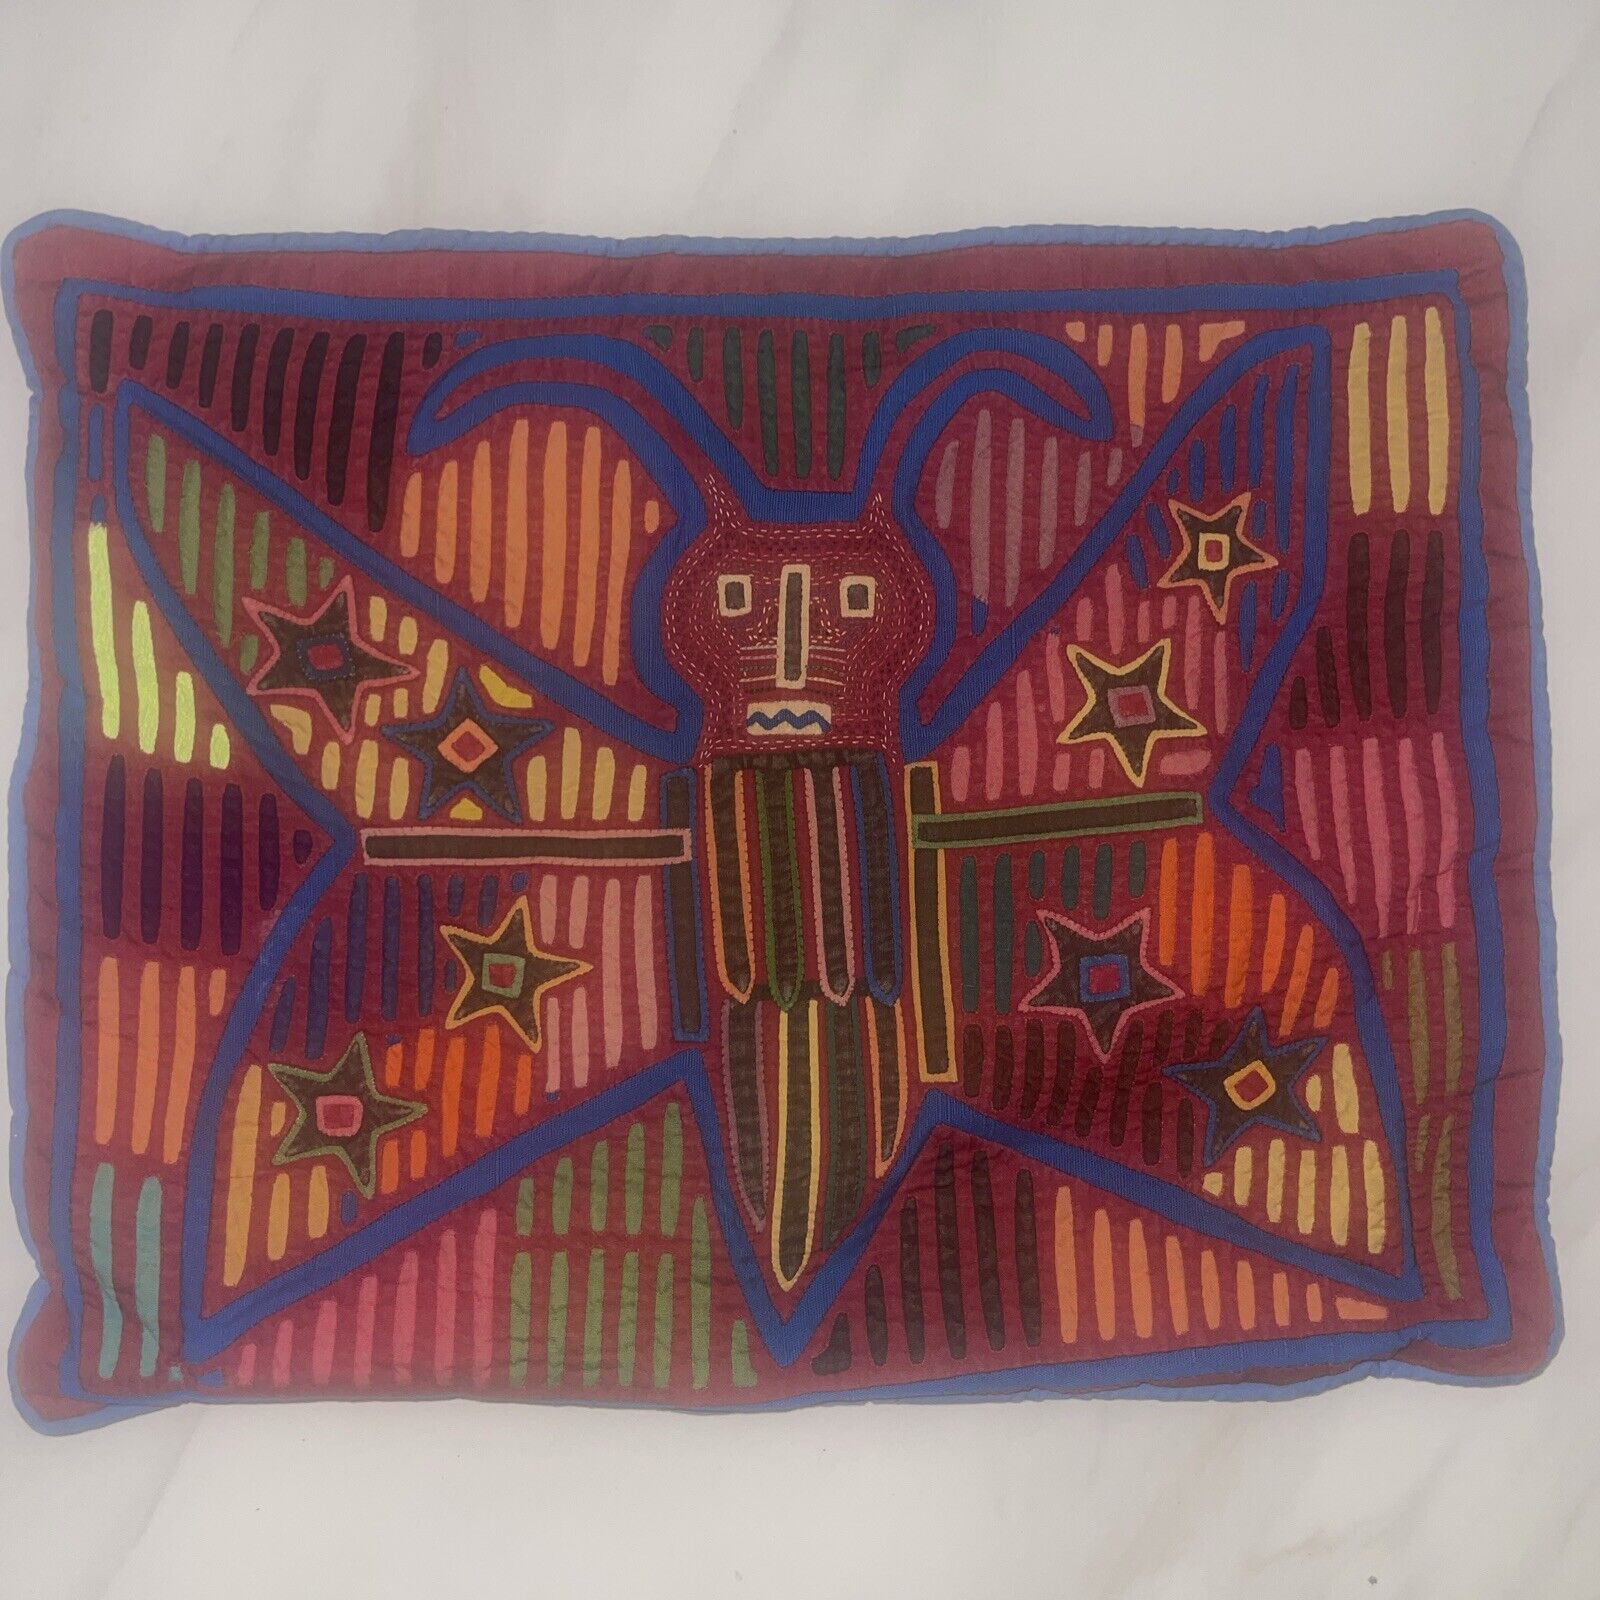 Vintage MOLA of Toucan Pillow made by Kuna women of Panama  approx. 15”x12”